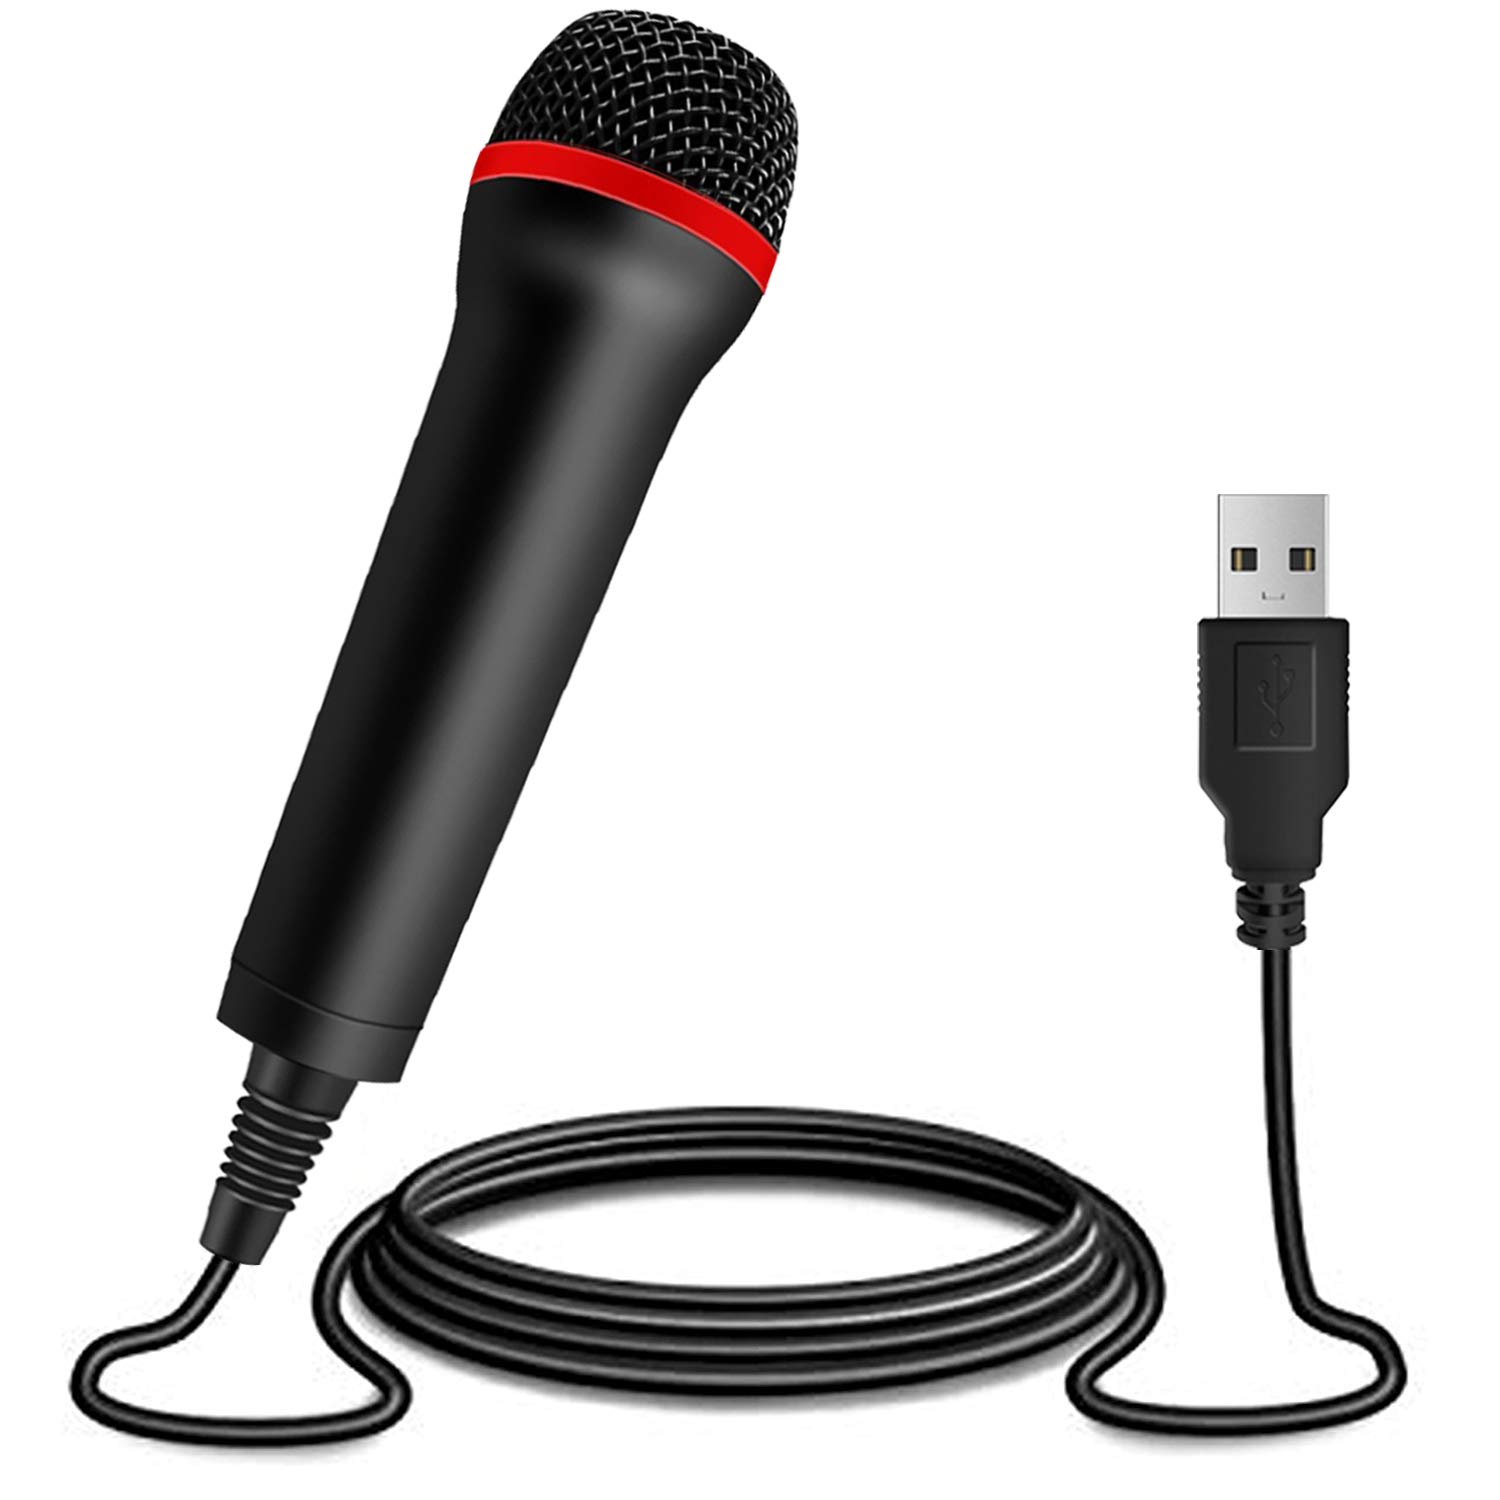 TPFOON 4M 13FT Wired USB Microphone for Rock Band, Guitar Hero, Let's Sing - Compatible with Sony PS2, PS3, PS4, PS5, Nintendo Switch, Wii, Wii U, Microsoft Xbox 360, Xbox One and PC